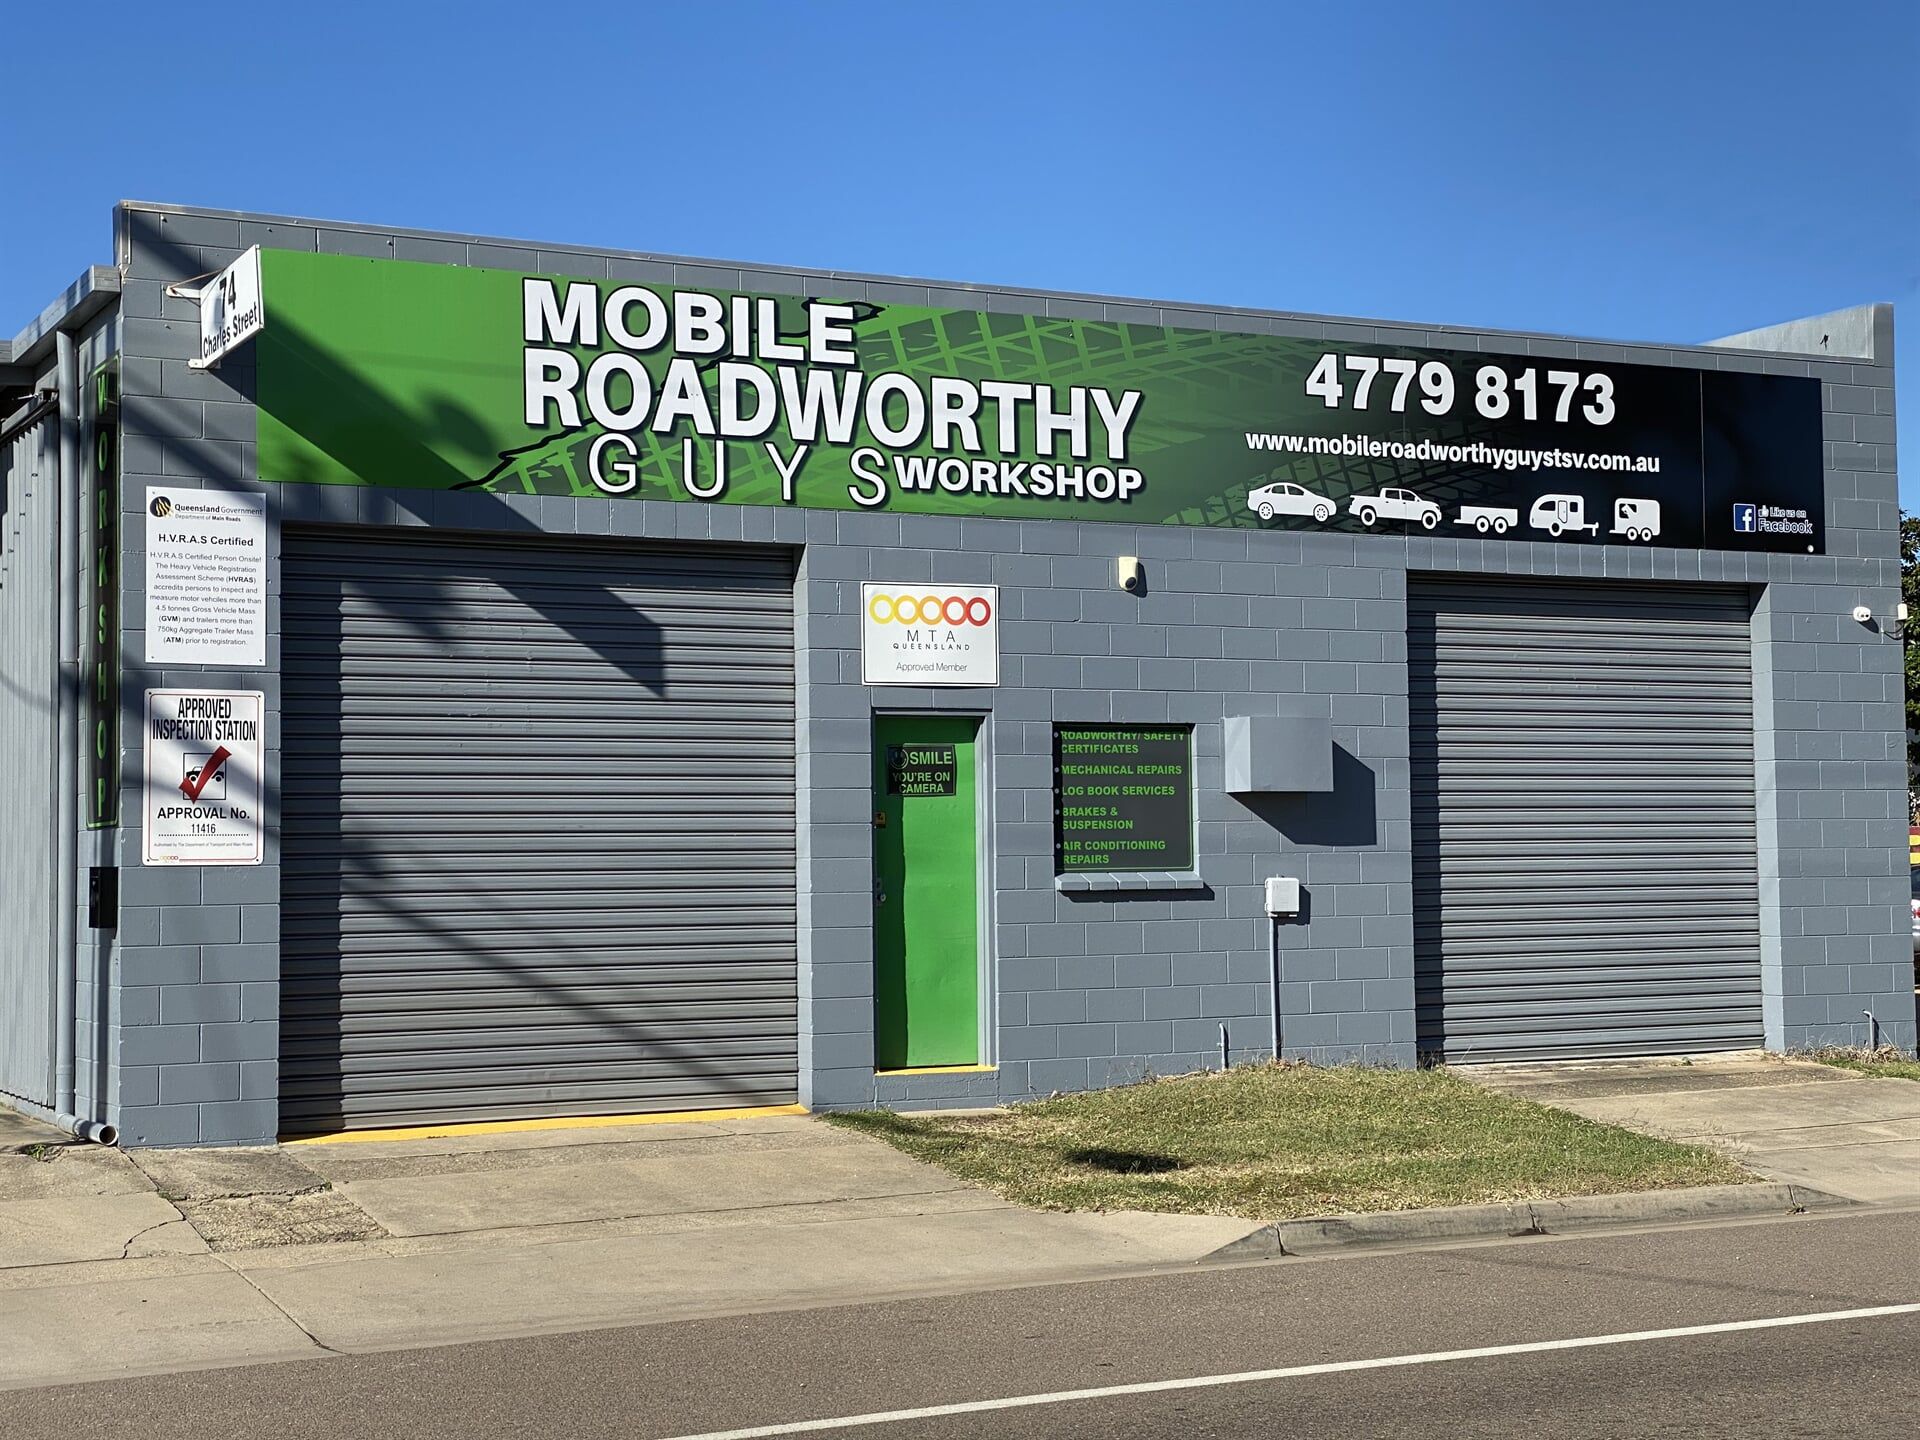 The Workshop — Mobile Roadworthy Guys Townsville in Aitkenvale, QLD